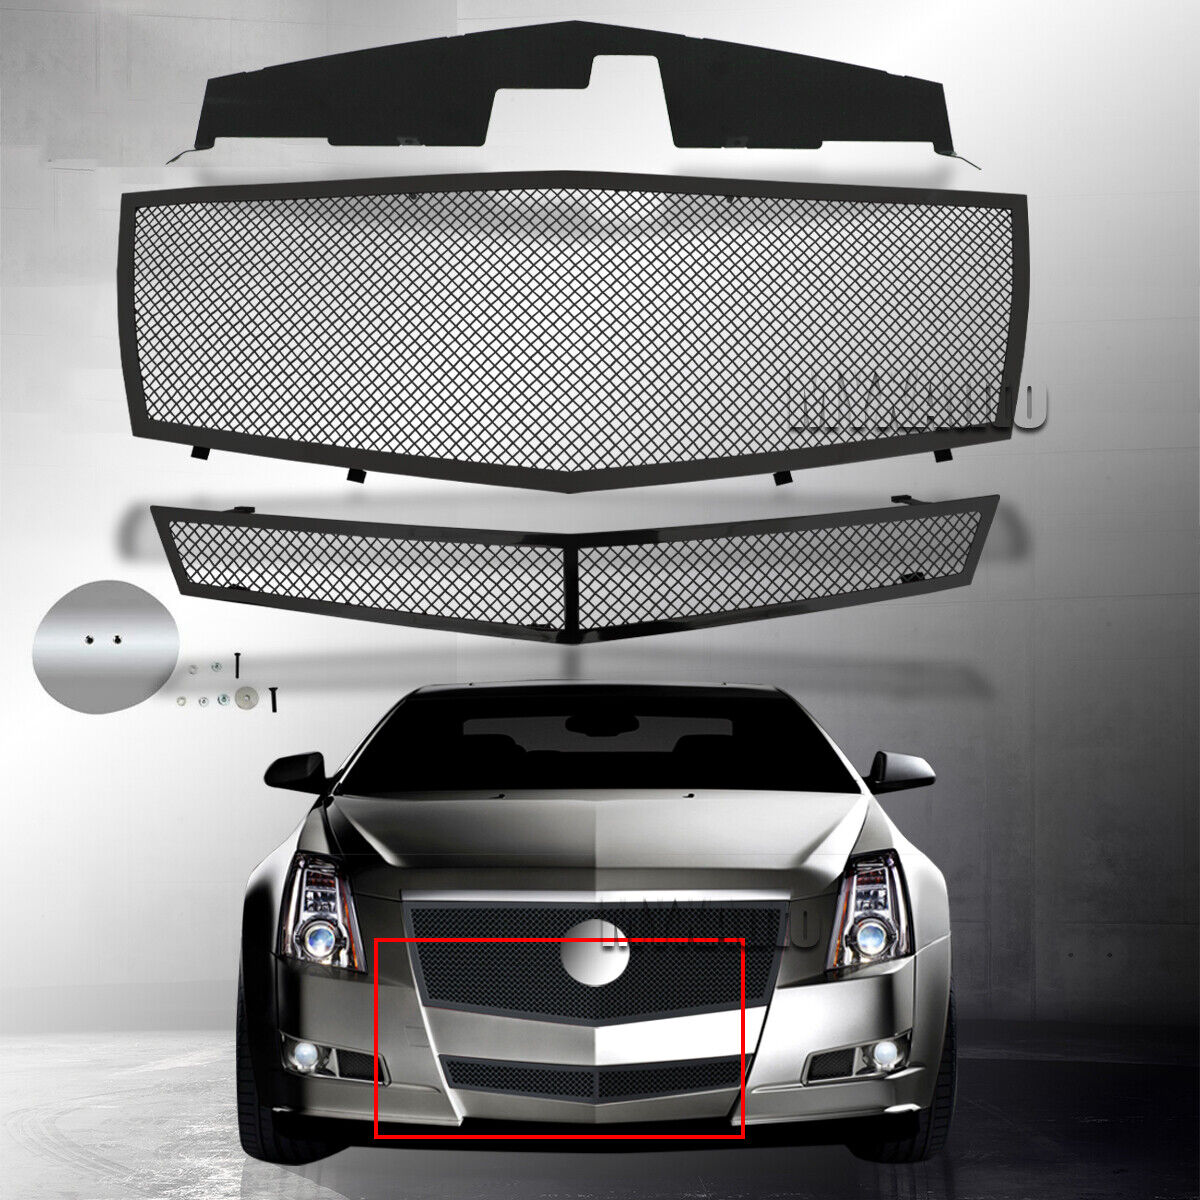 Mesh Grille Fits 08-13 Cadillac CTS Black Stainless Steel Grill Insert 09 10 11